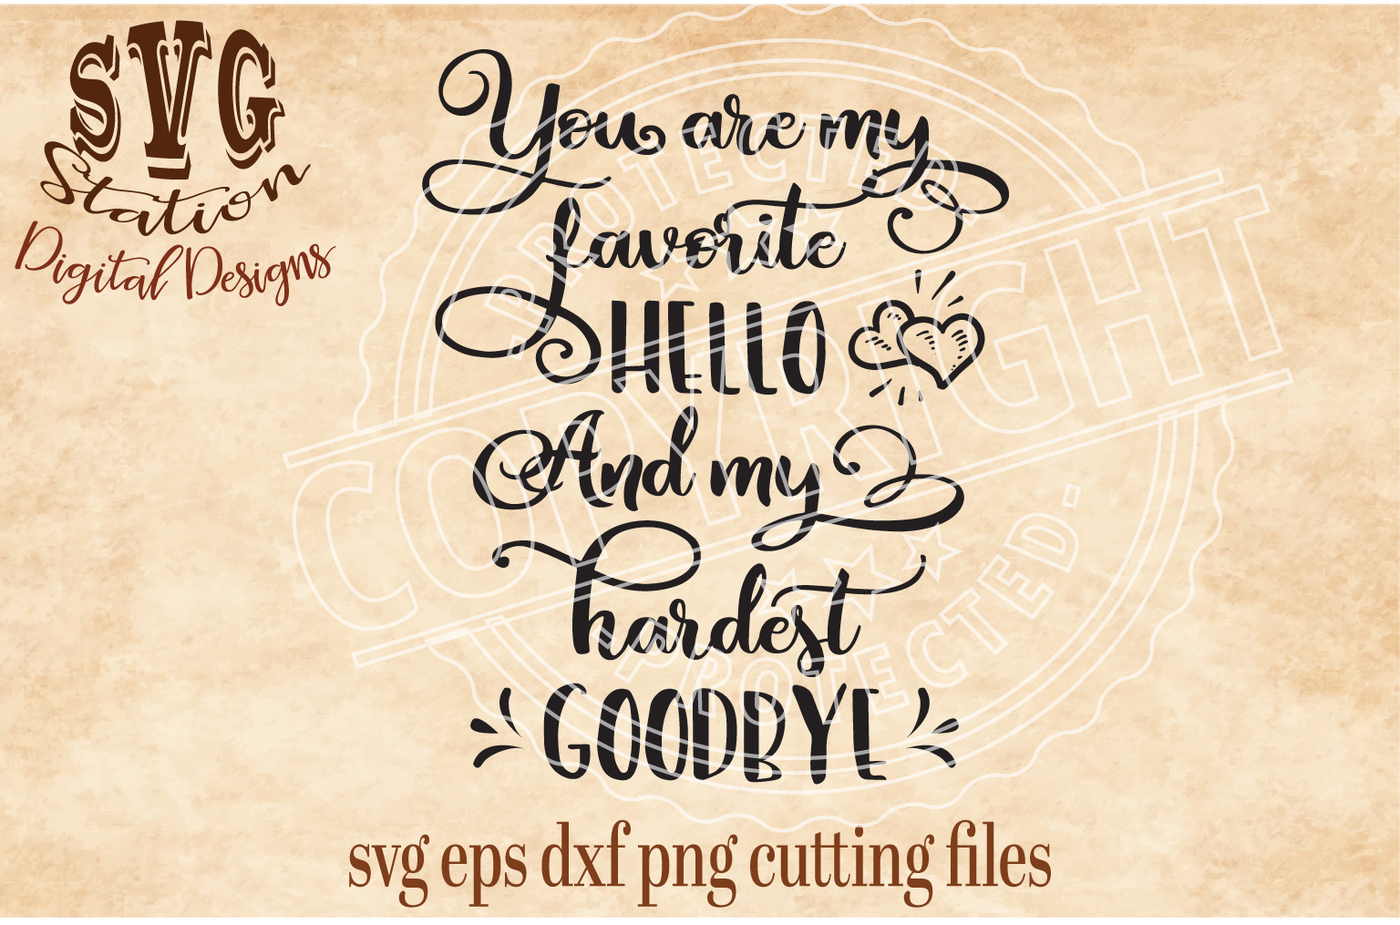 ori 55766 9c13adf9a1adf7aad2cf4df457467c9e32783818 you are my favorite hello and my hardest goodbye svg dxf png eps cutting file silhouette cricut